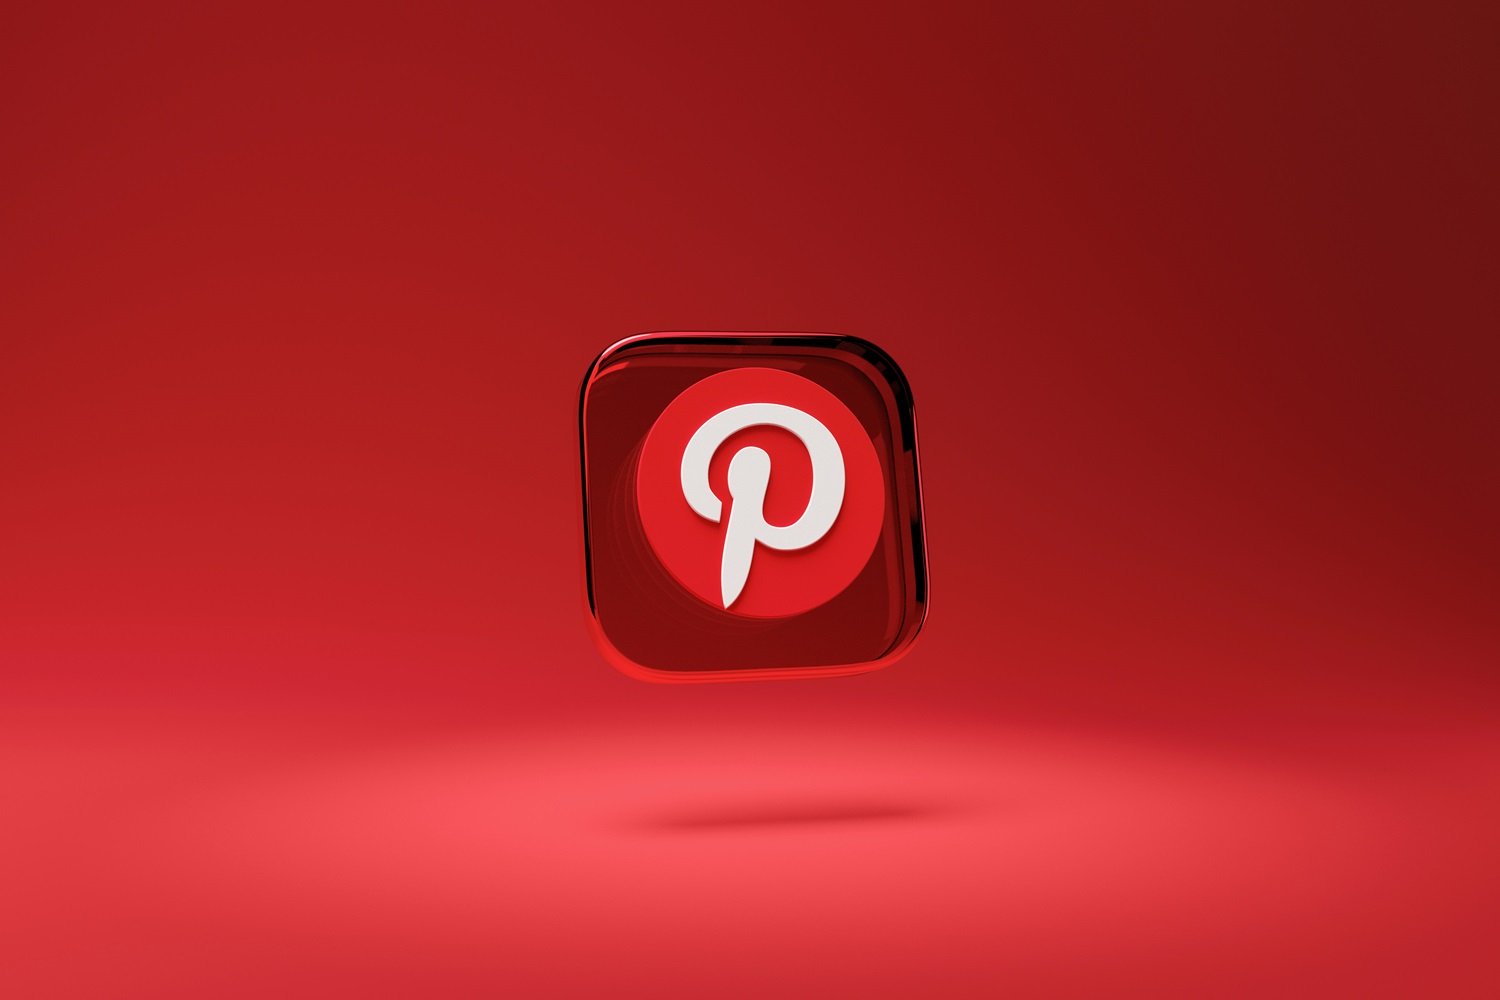 5 Ways to Make the Most of Pinterest's New Shopping Features for Small Businesses